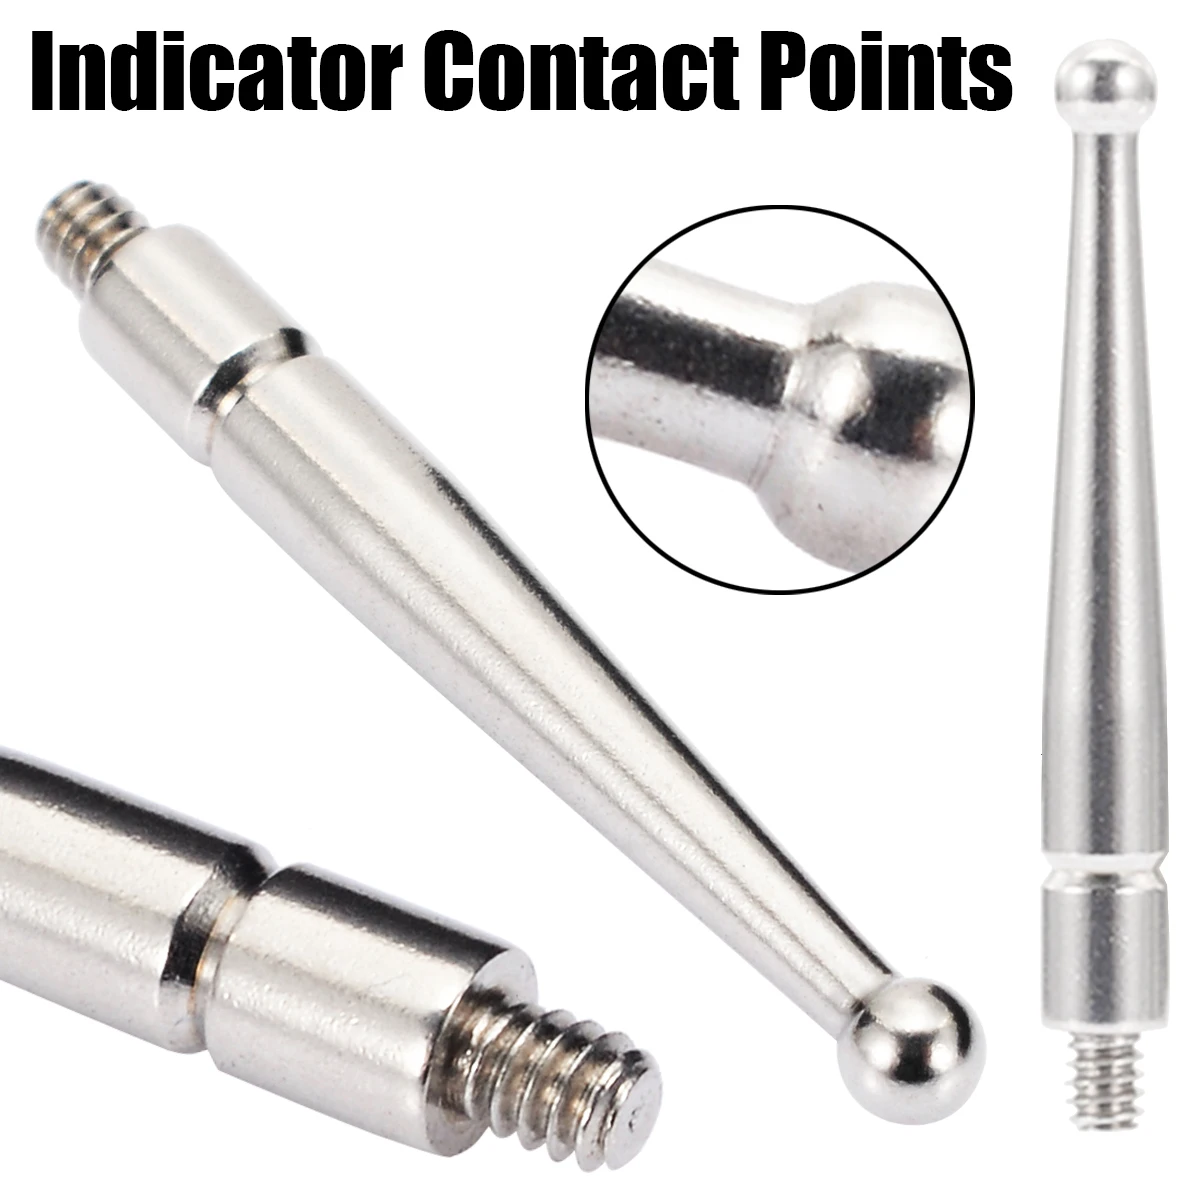 Carbide Contact Points For Dial Test Indicator Long Rod  Stem M1.6 Thread Shank 